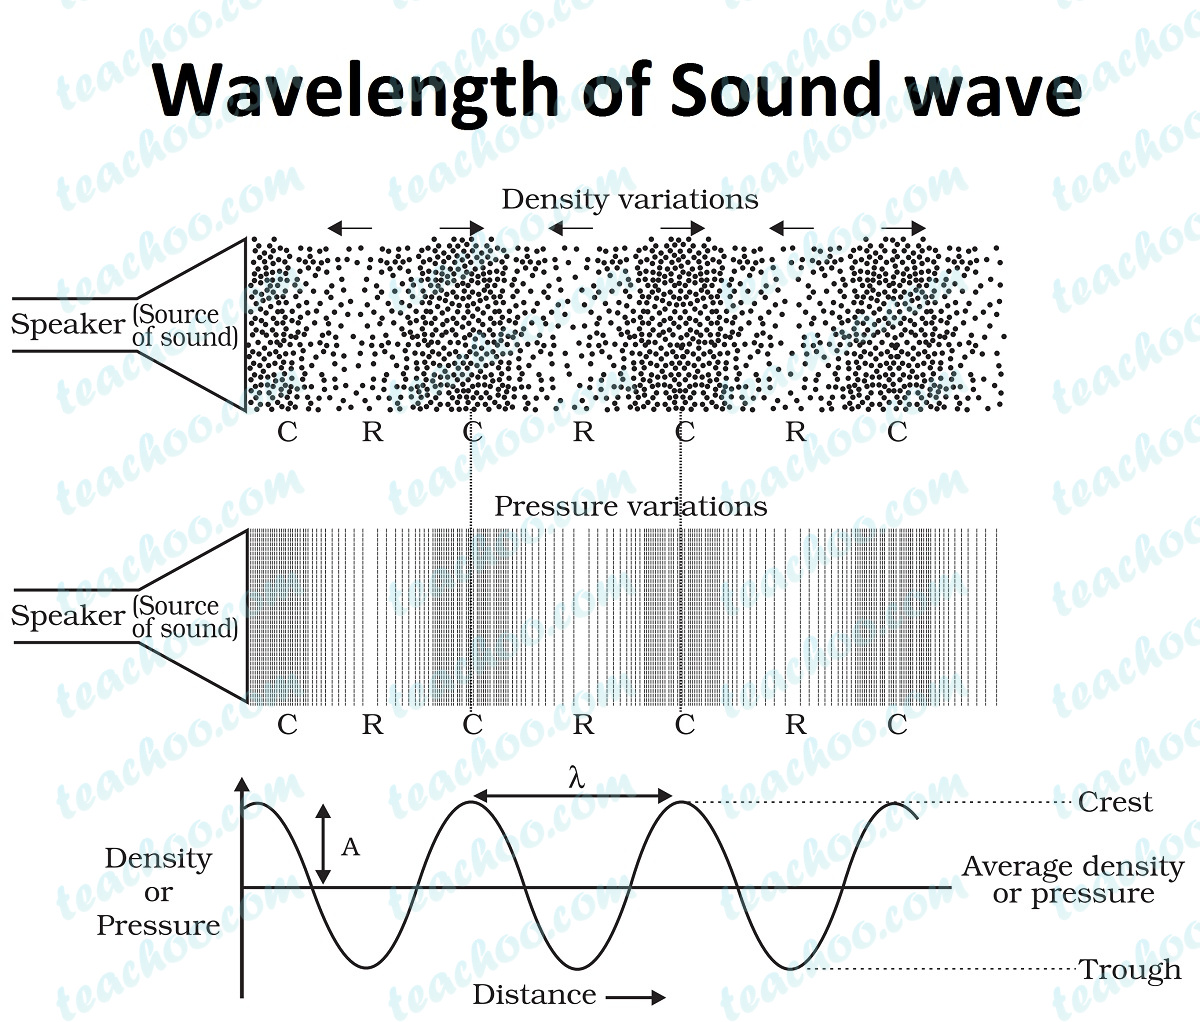 wavelength-of-sound-waves-class-9-science-notes-by-teachoo